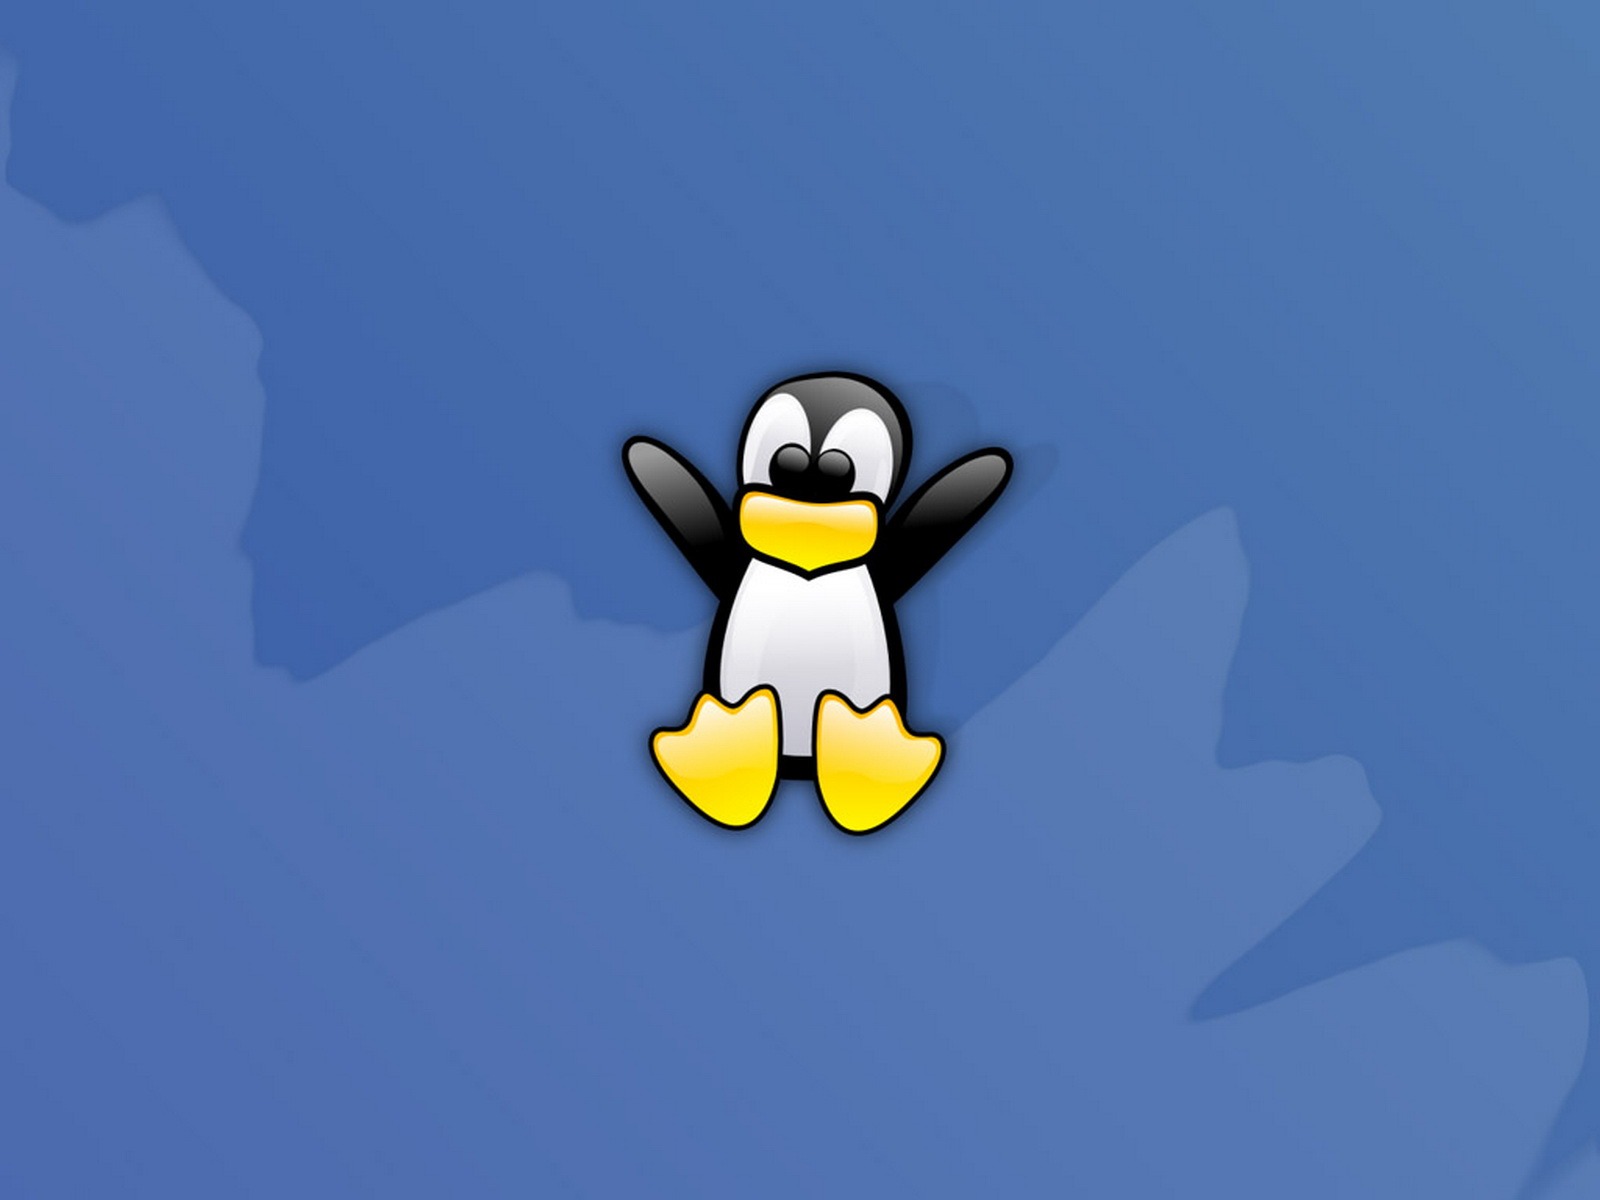 Linux tapety (2) #18 - 1600x1200